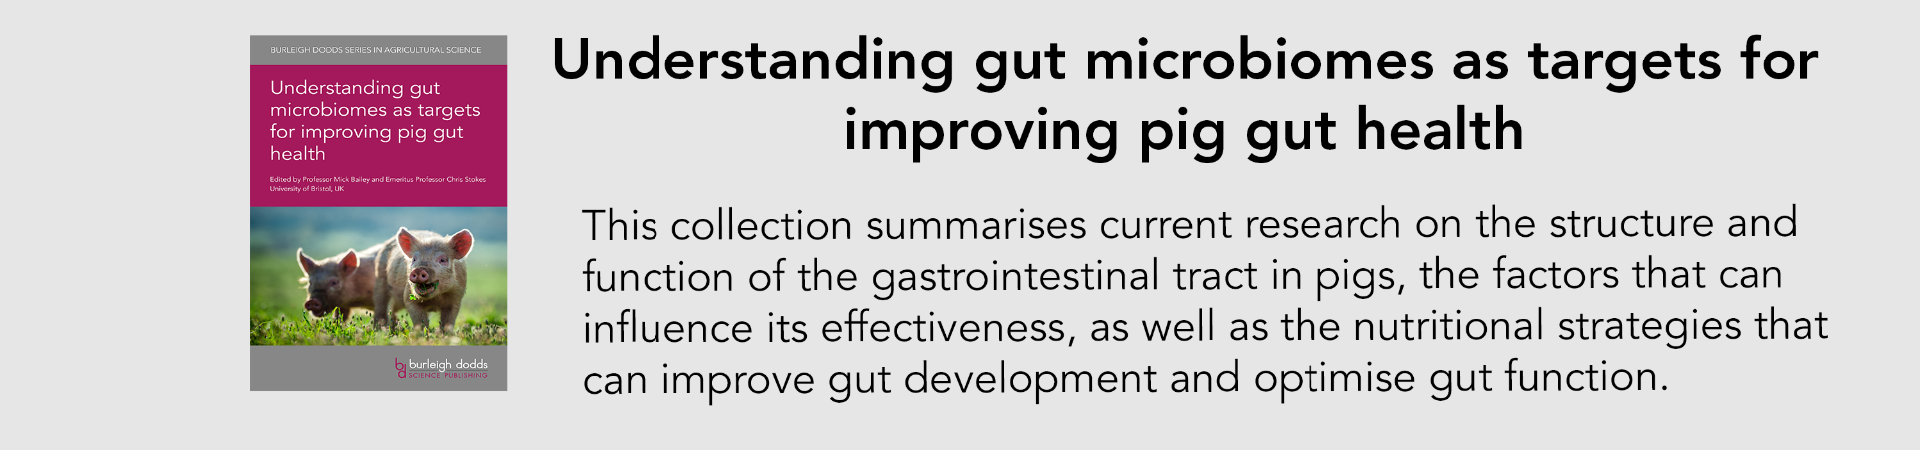 Understanding gut microbiomes as targets for improving pig gut health